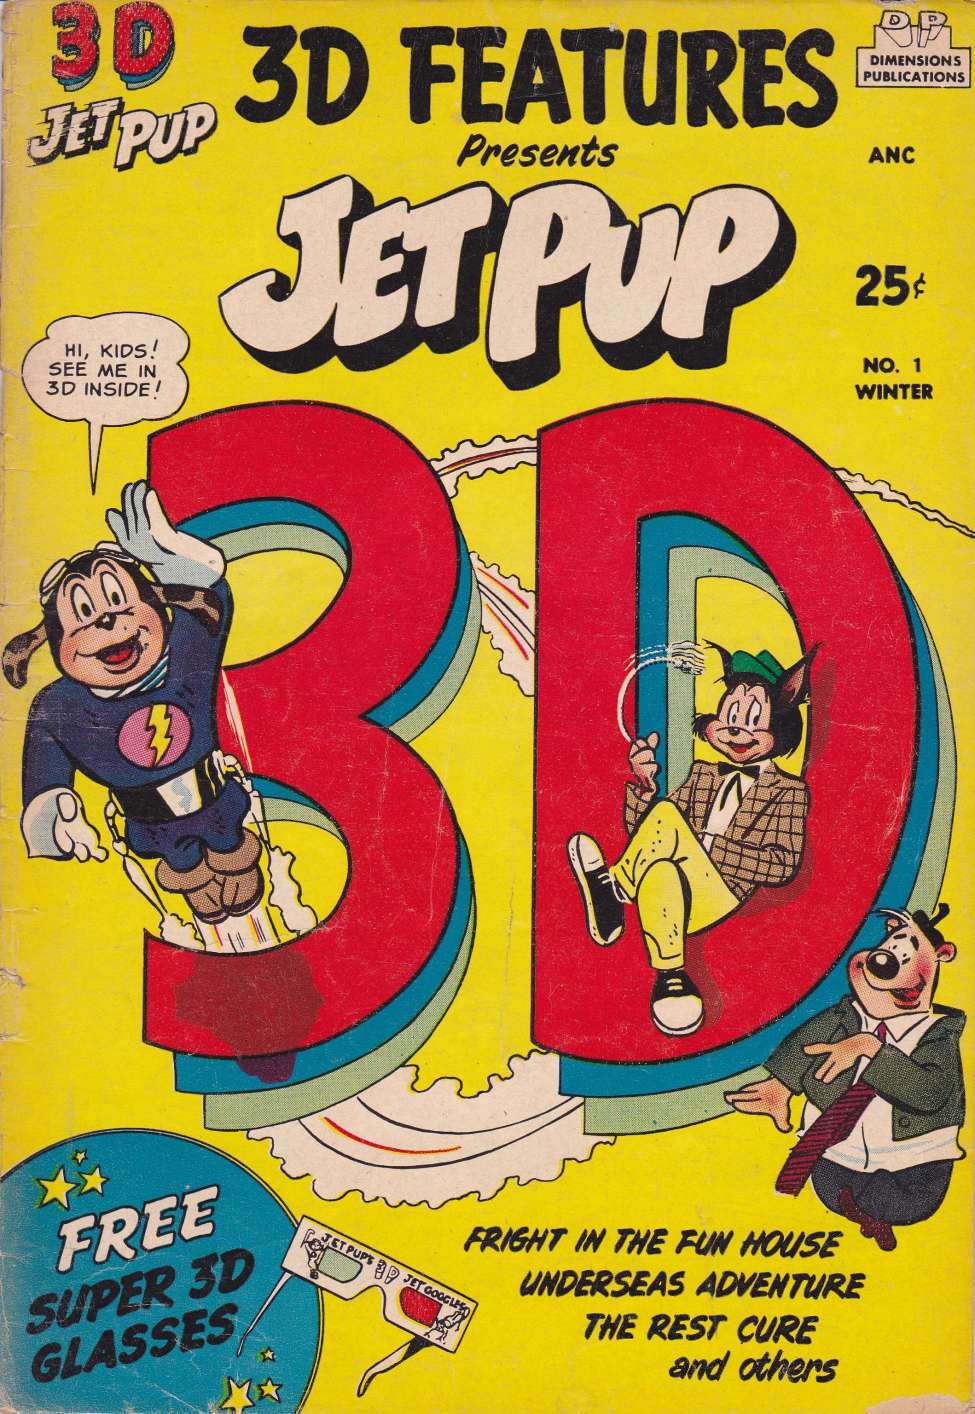 Book Cover For Dimensions Publications - Jet Pup 1 3D